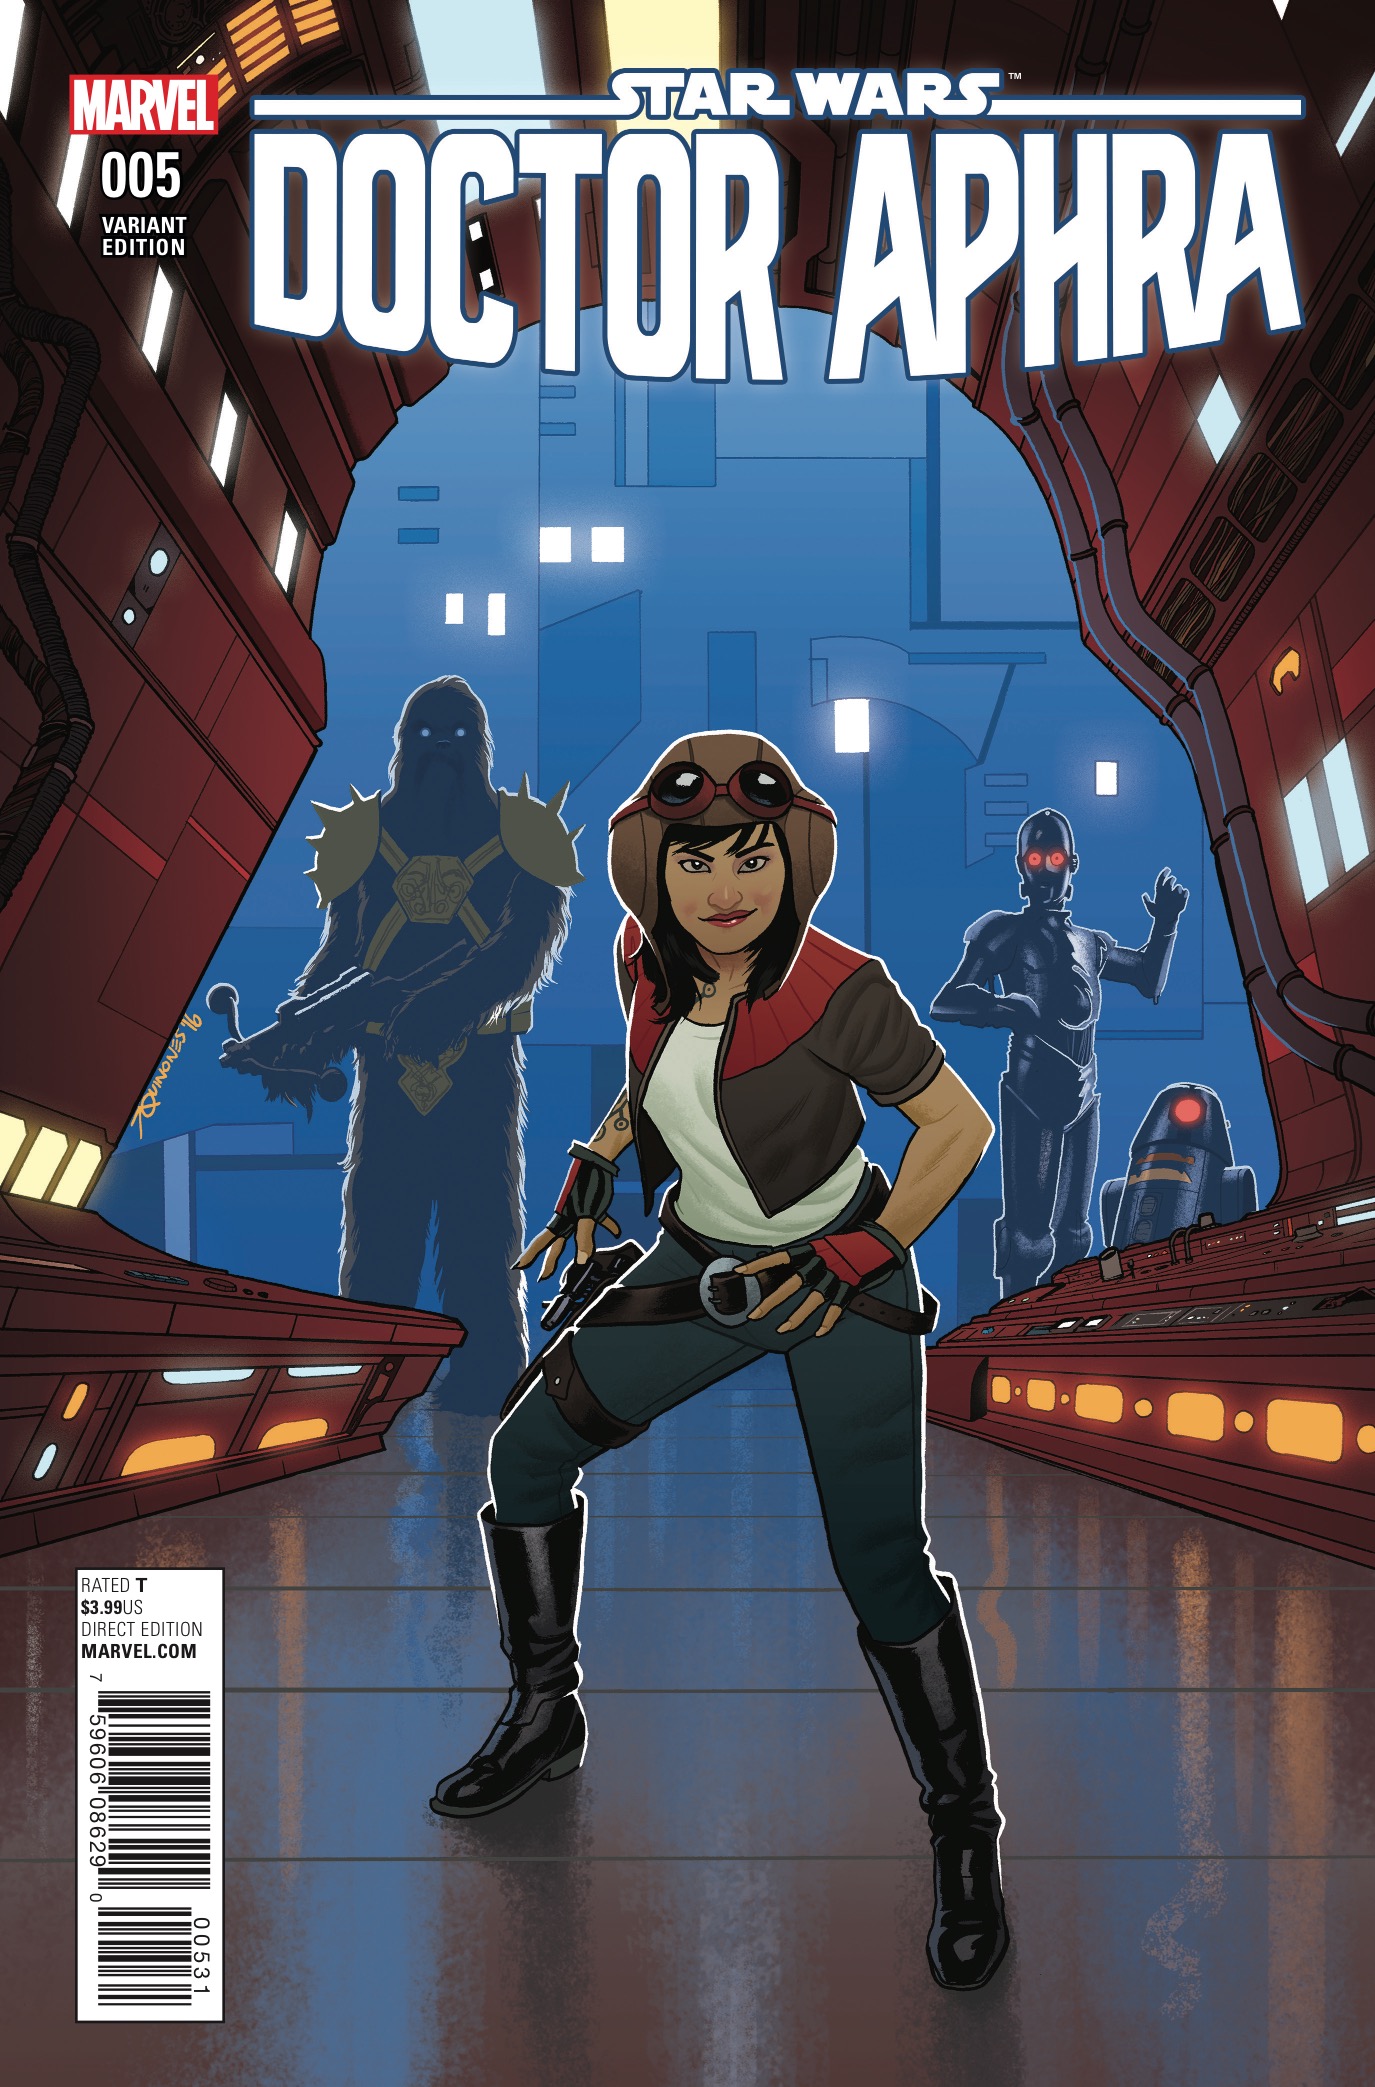 Star Wars: Doctor Aphra #5 Review